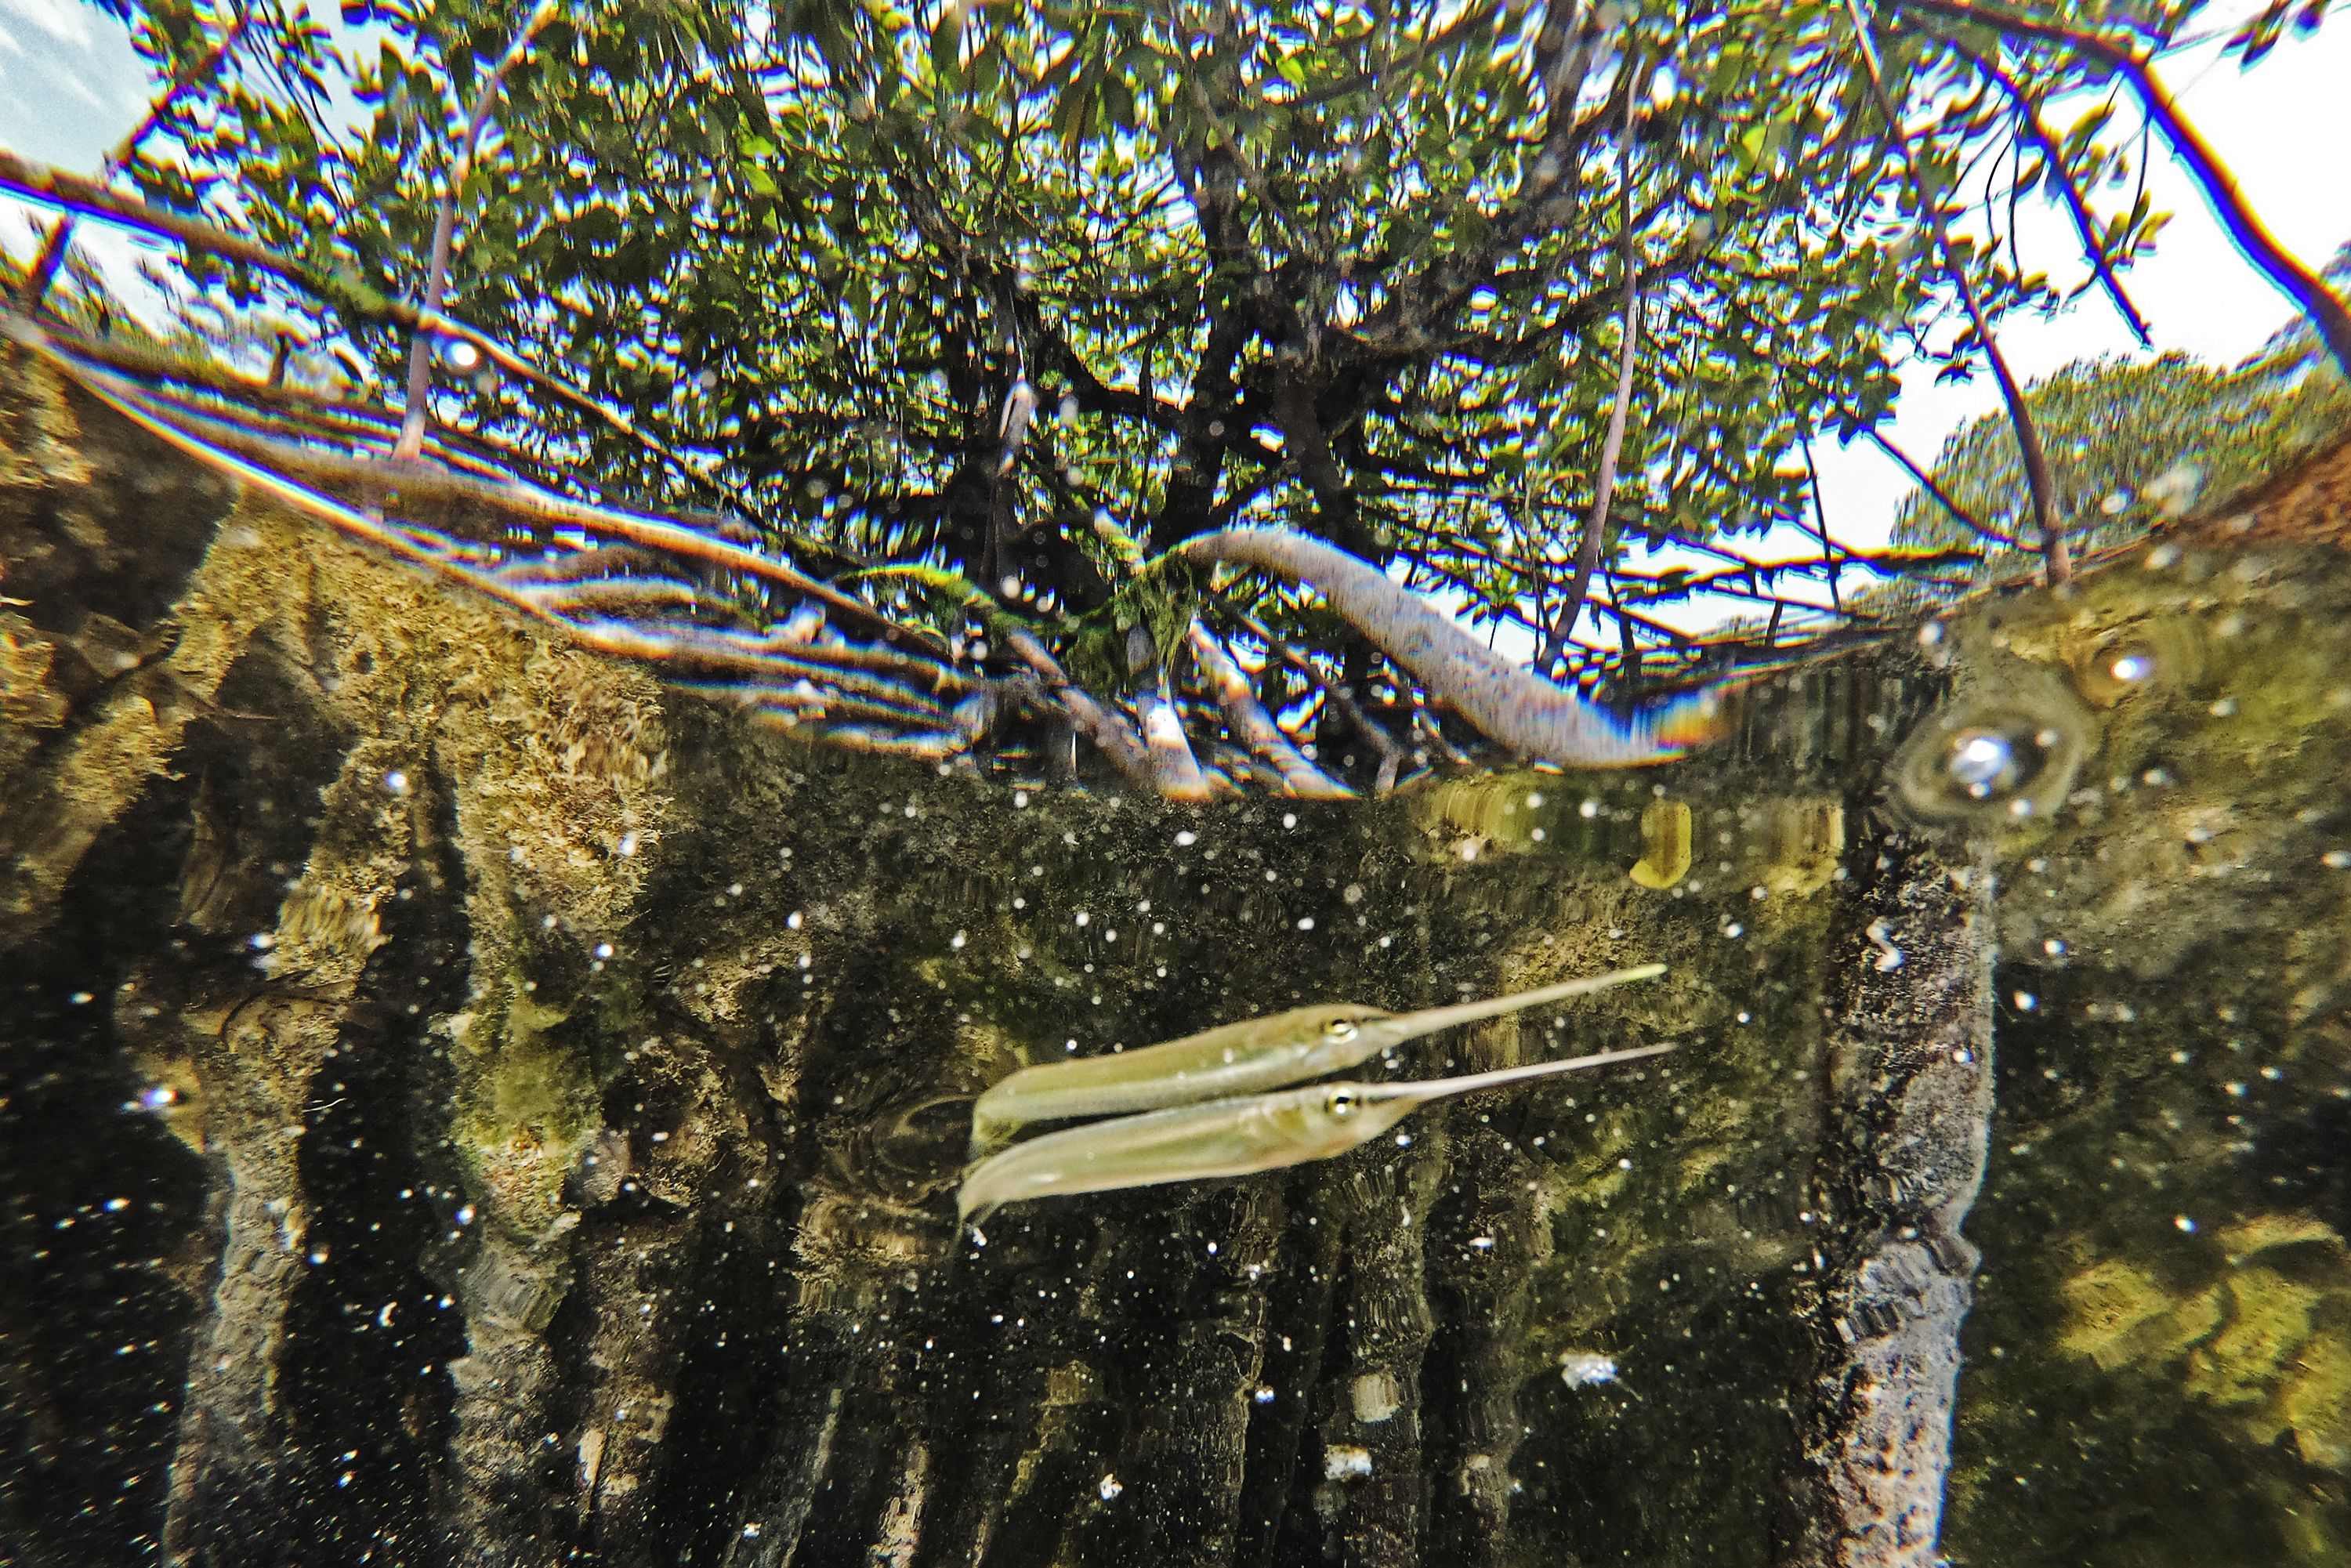 In the water lapping at mangrove roots, young fish and plankton take refuge from predators. Image by Ardiles Rante. Indonesia, 2019.